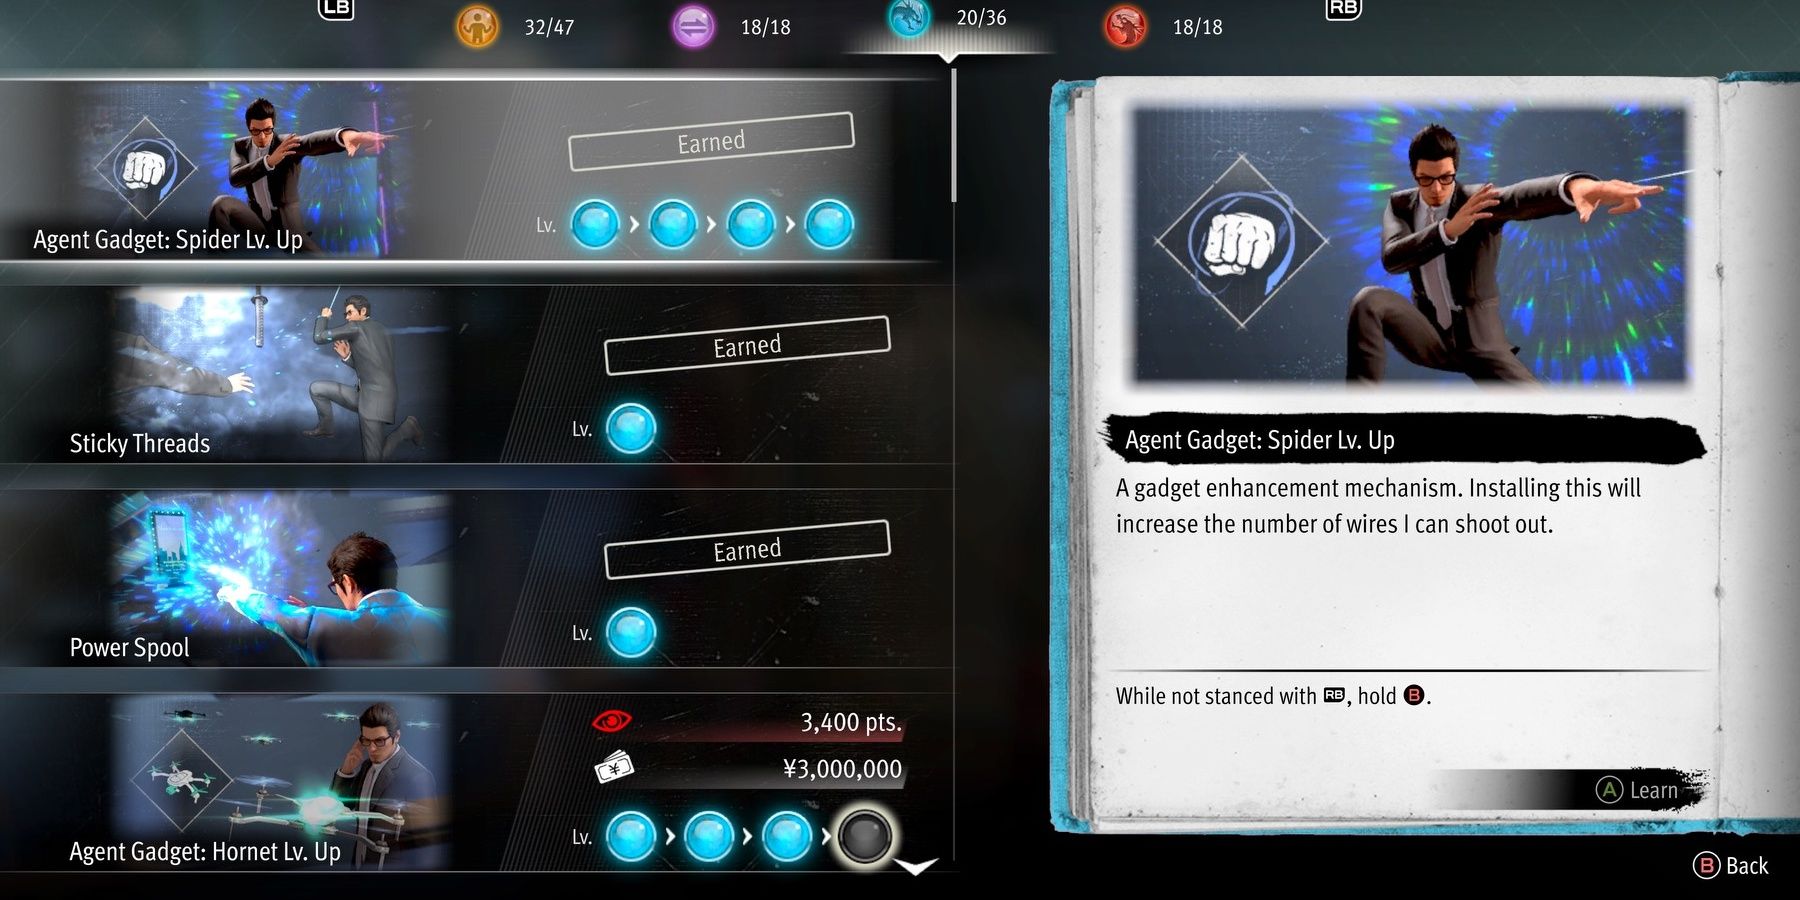 The Agent Gadget: Spider in the menu of Like A Dragon Gaiden: The Man Who Erased His Name.